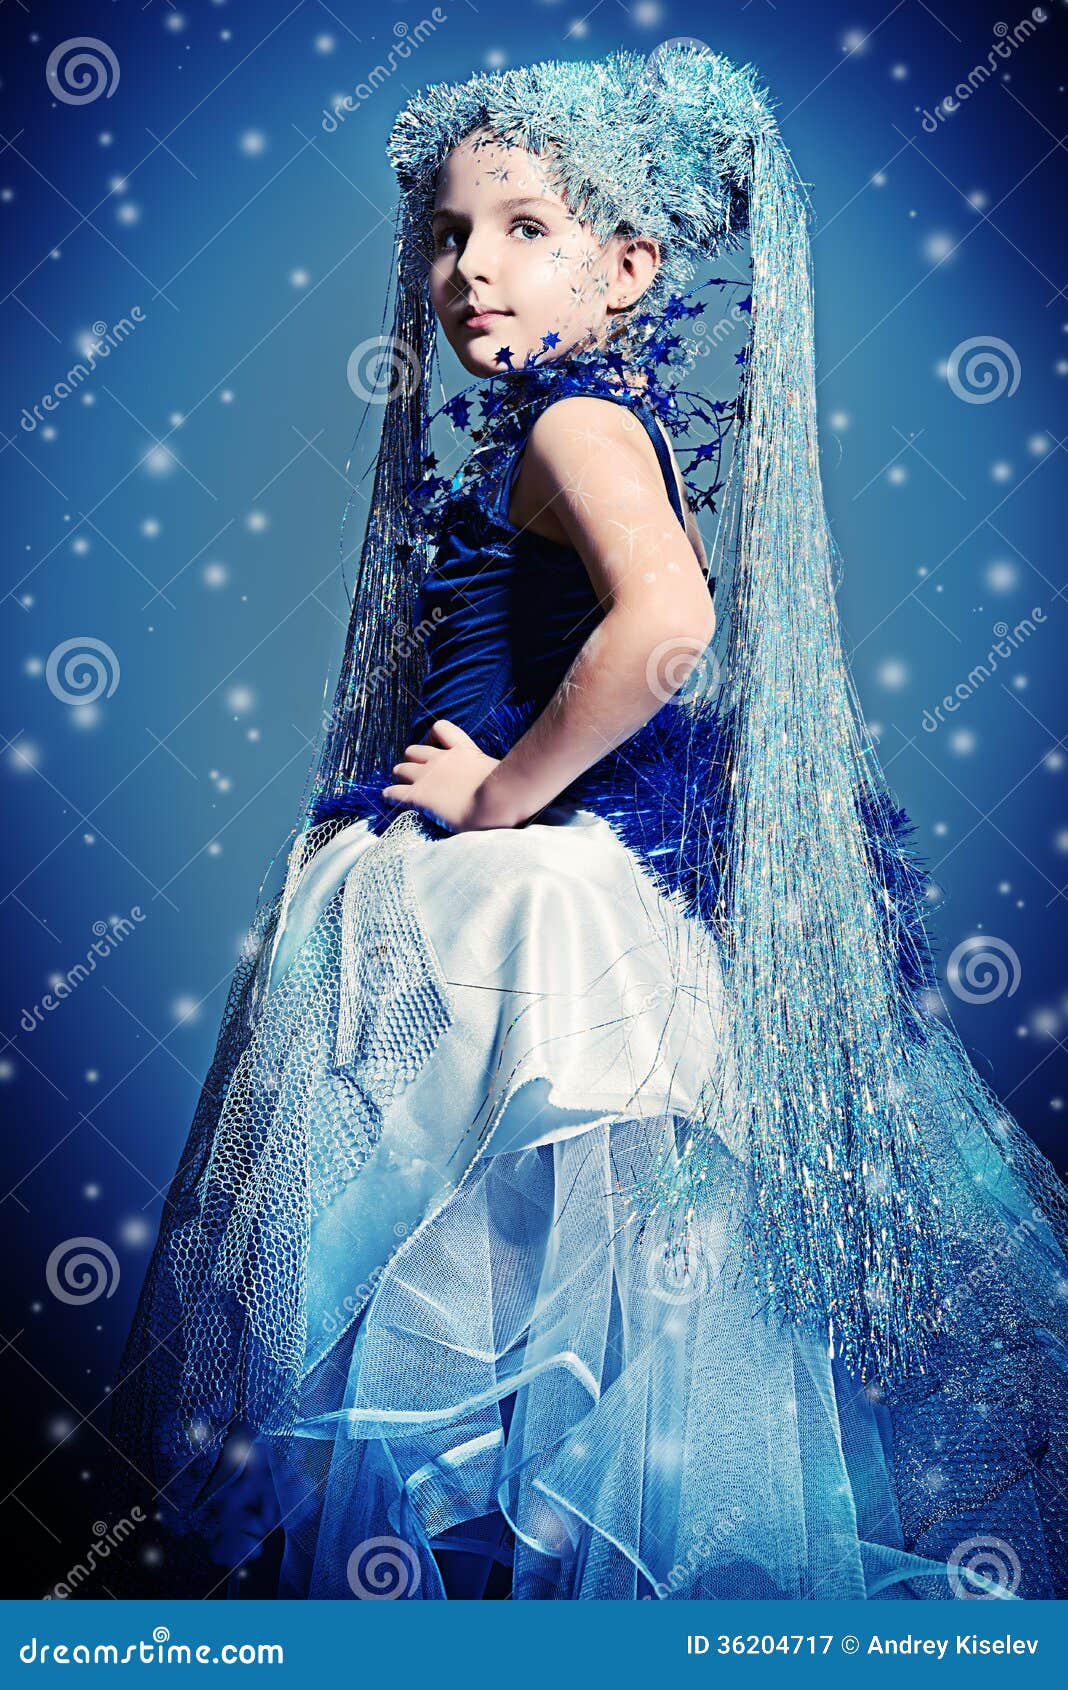 Silver Hair Royalty Free Stock Photography - Image: 36204717